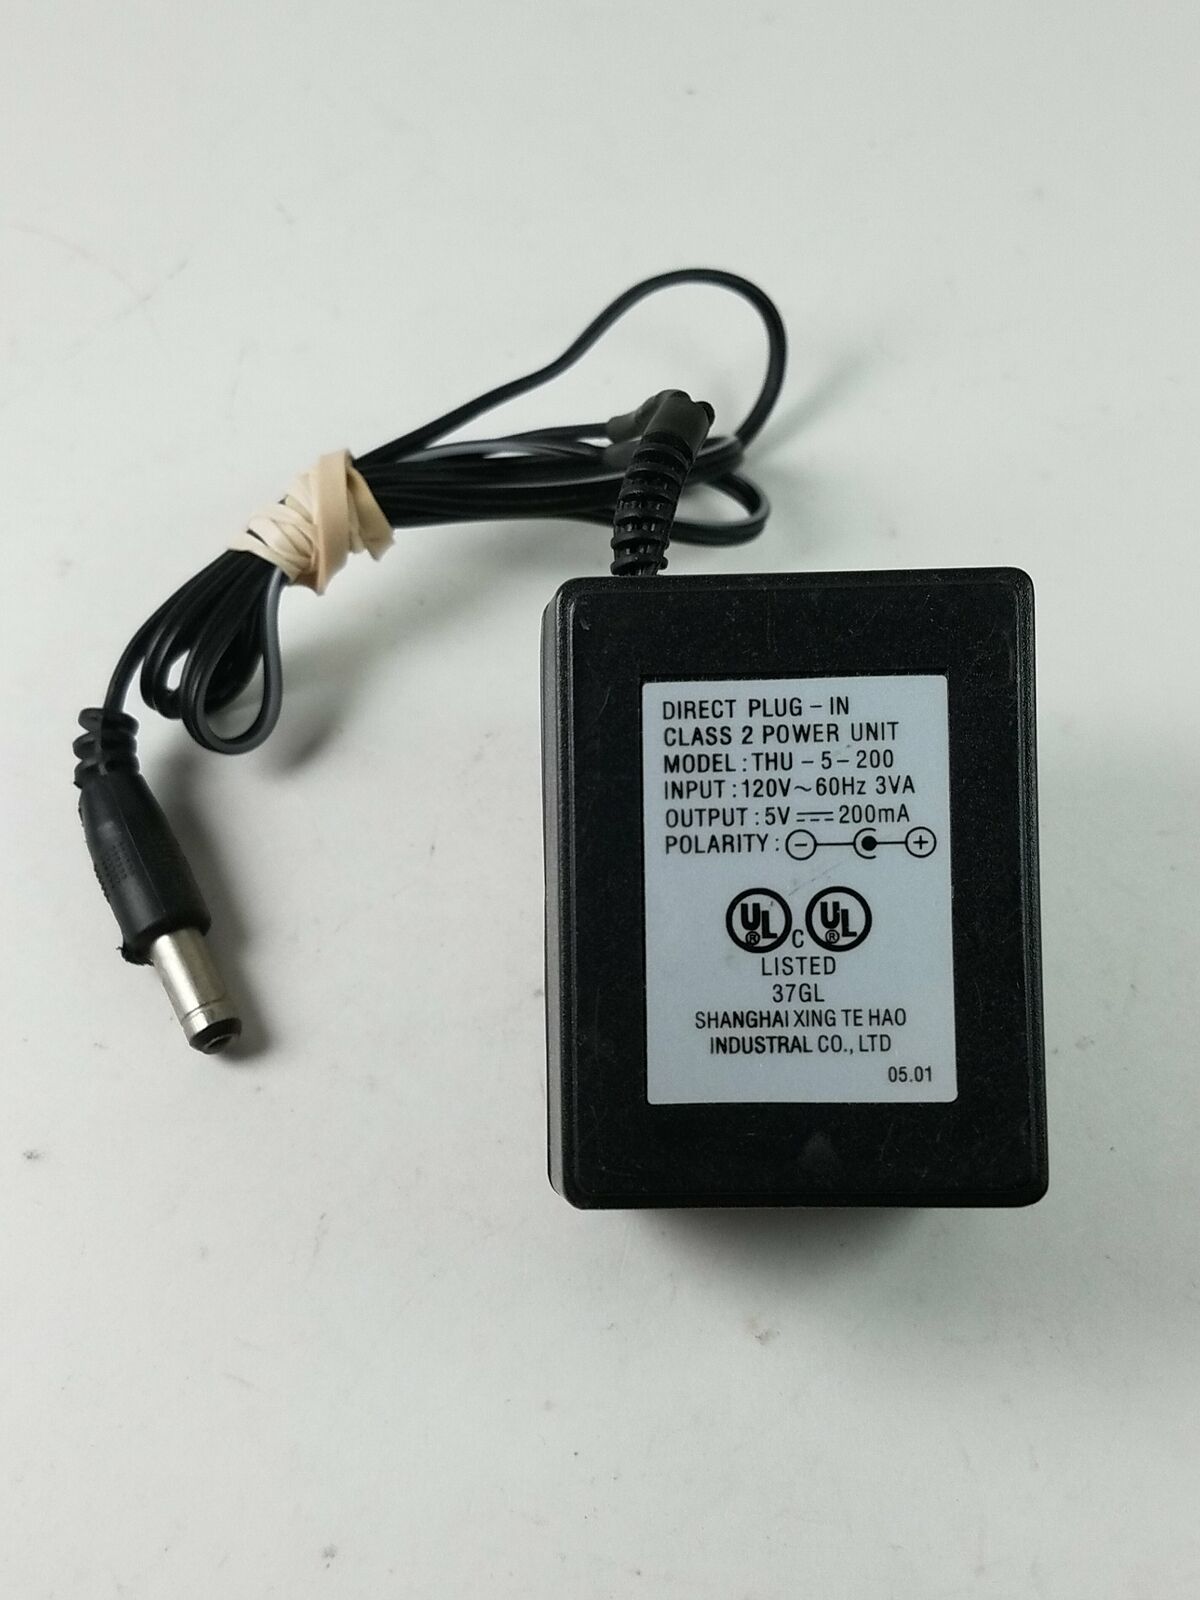 NEW Shanghai Xing THU-5-200 AC Adapter Power Supply Charger 5V 200mA